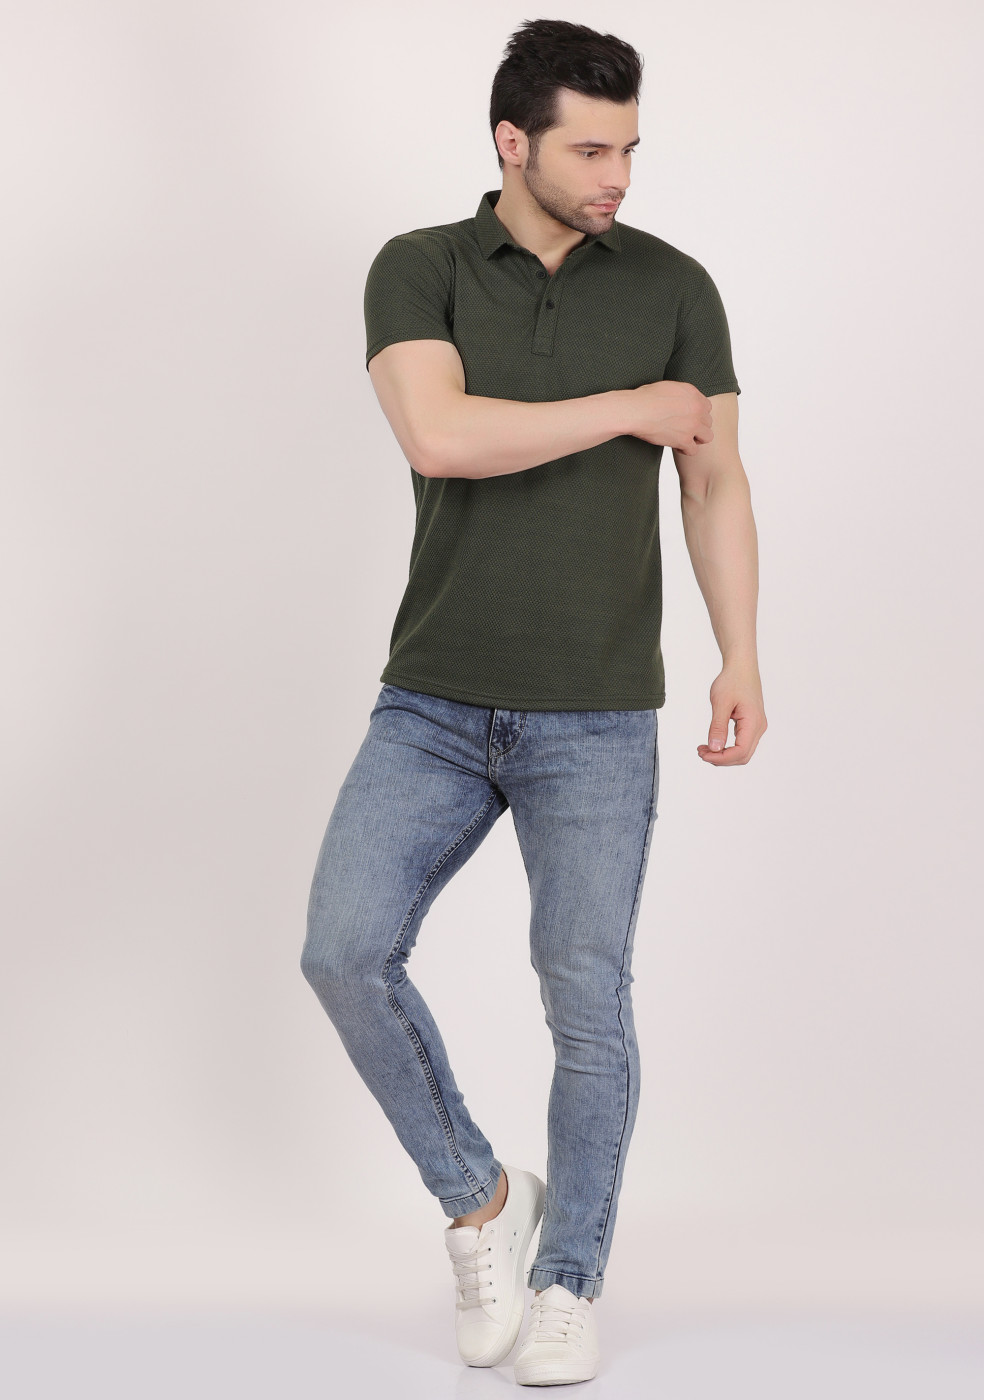 Popcorn Textured Casual Polo T Shirts For Men